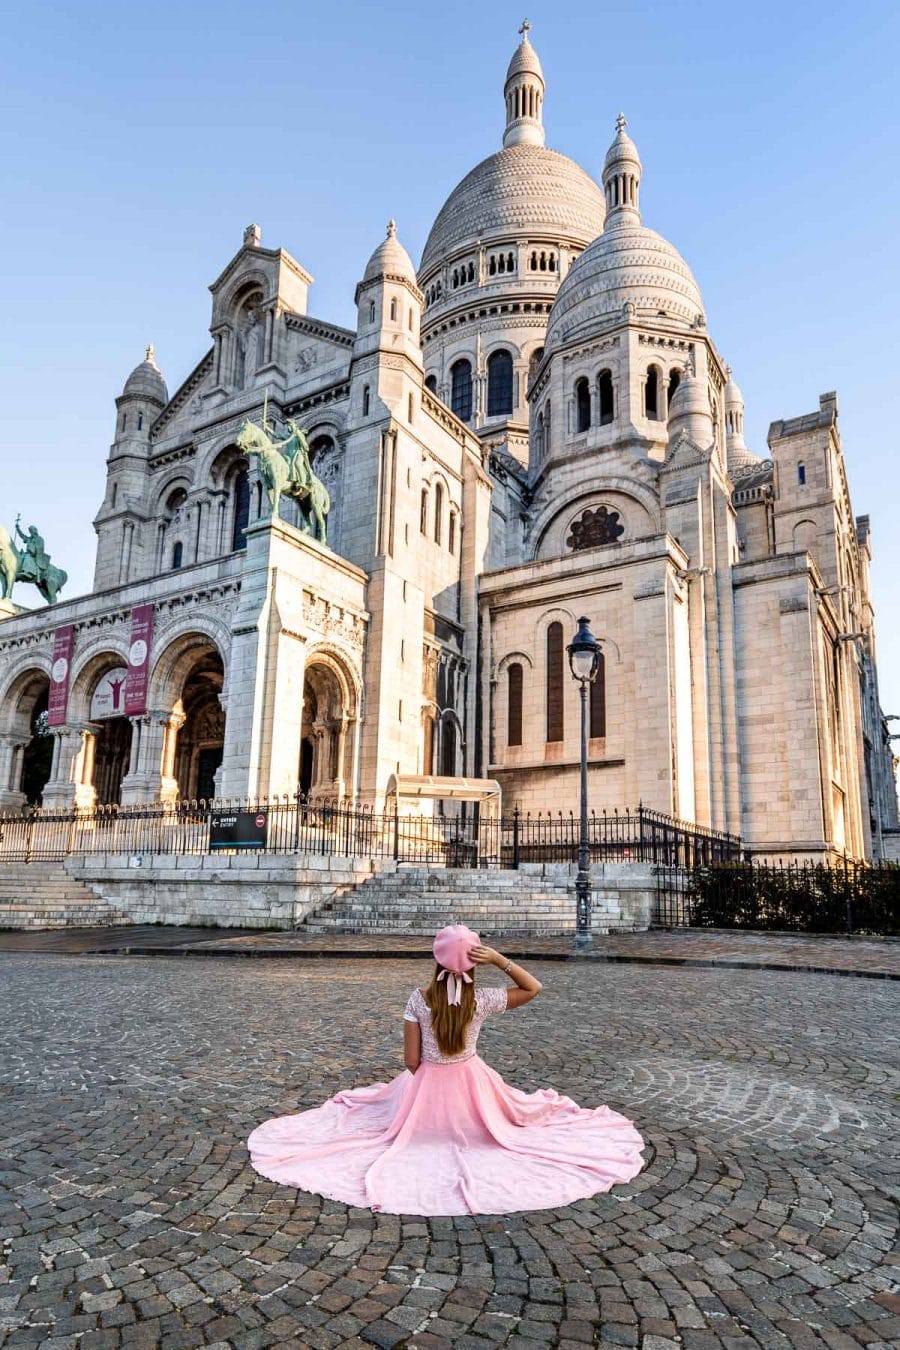 Girl in a pink dress sitting in front of the Sacré-Coeur Basilica in Paris